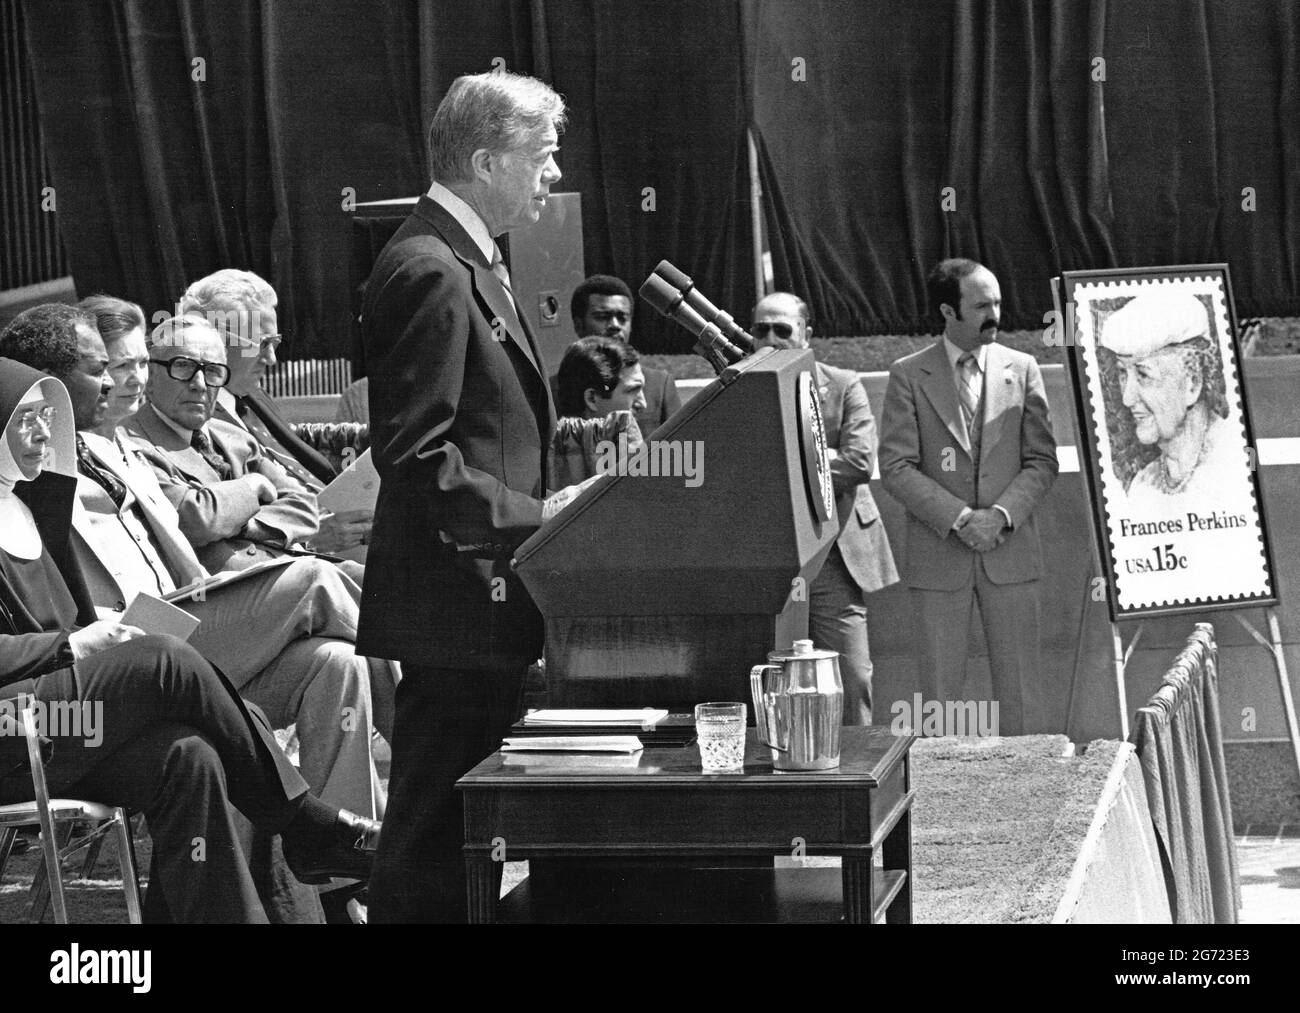 United States President Jimmy Carter speaks at the dedication of the new Frances Perkins Labor Building in Washington, DC on Thursday, April 10, 1980. Ms. Perkins was the first female Cabinet member in US history when US President Franklin Delano Roosevelt appointed her as US Secretary of Labor. Pictured at far right is the poster of a new fifteen cent stamp that will bear Ms. Perkins likeness. Credit: Benjamin E. 'Gene' Forte / CNP Stock Photo